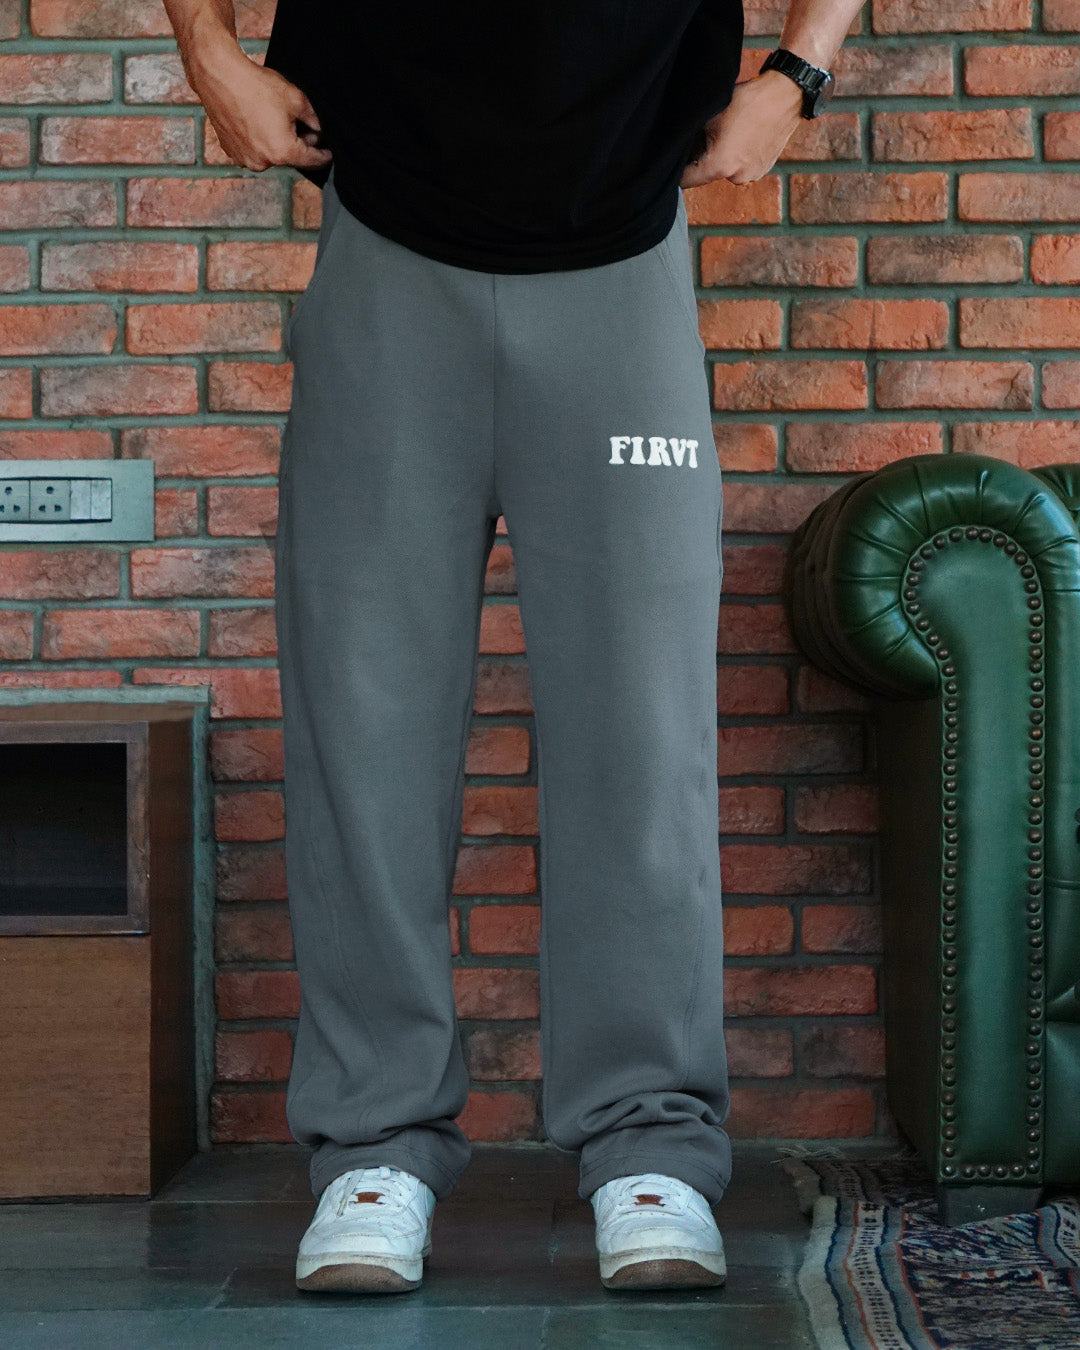 FIRVT RELAXED GREY SWEATPANTS